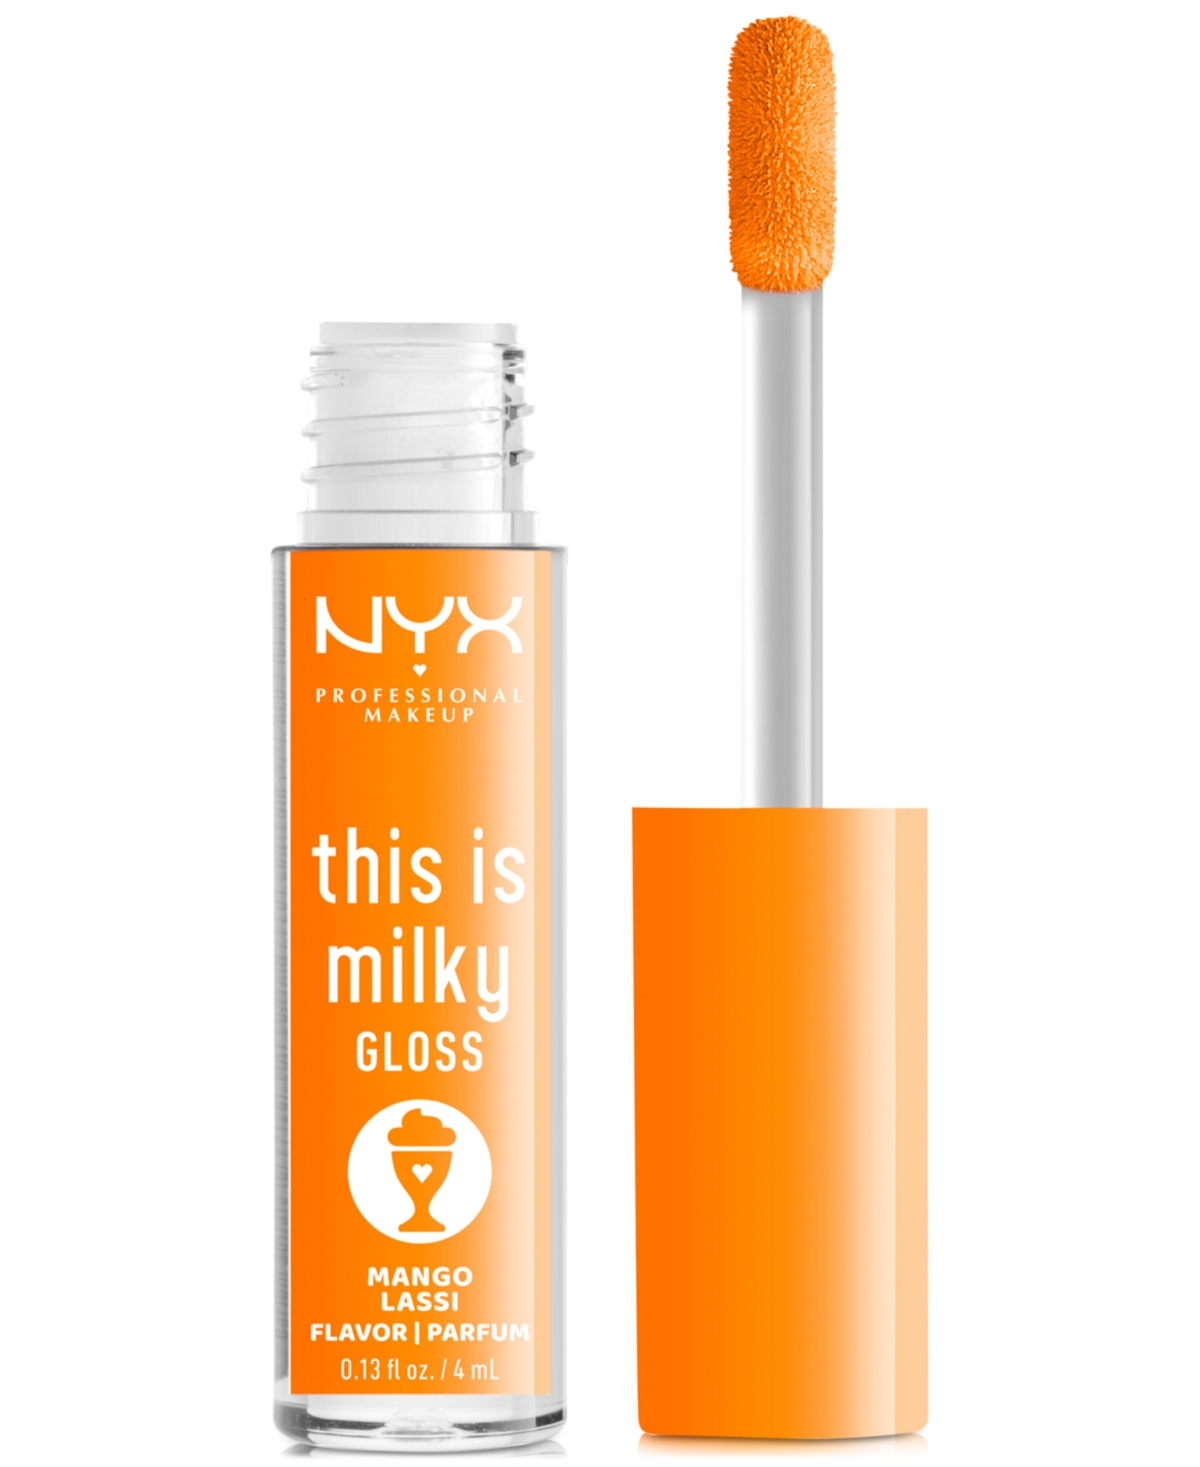 Nyx Professional Makeup This Is Milky Gloss In Mango Lassi